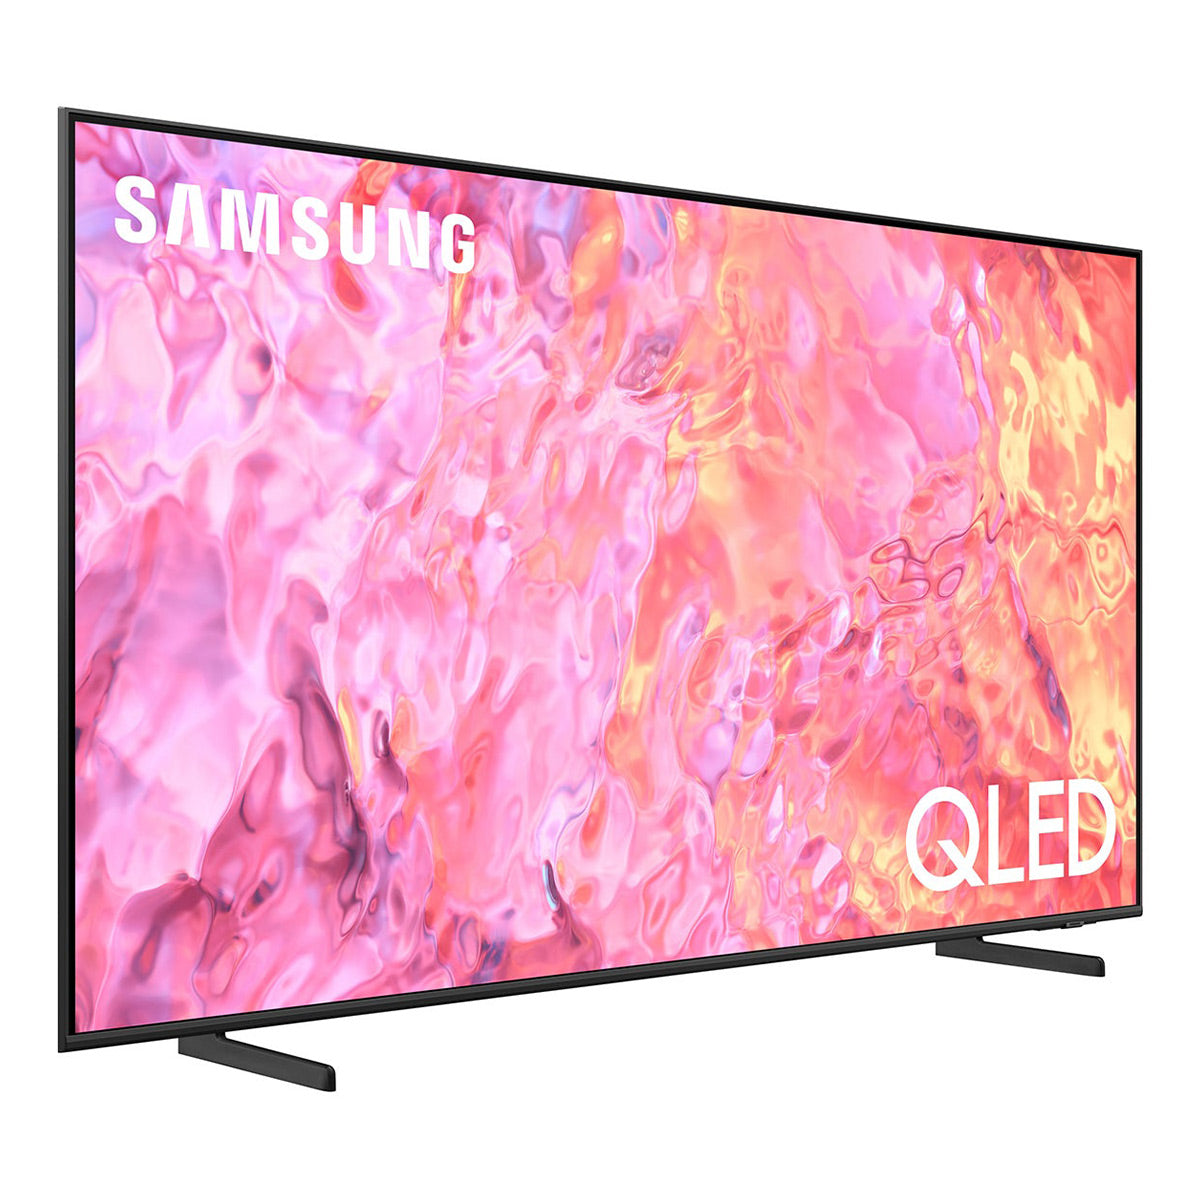 Samsung QN65Q60CA 65" QLED 4K Smart TV with Quantum HDR, 100% Color Volume, Dual LED Backlights, & Object Tracking Sound (2023)